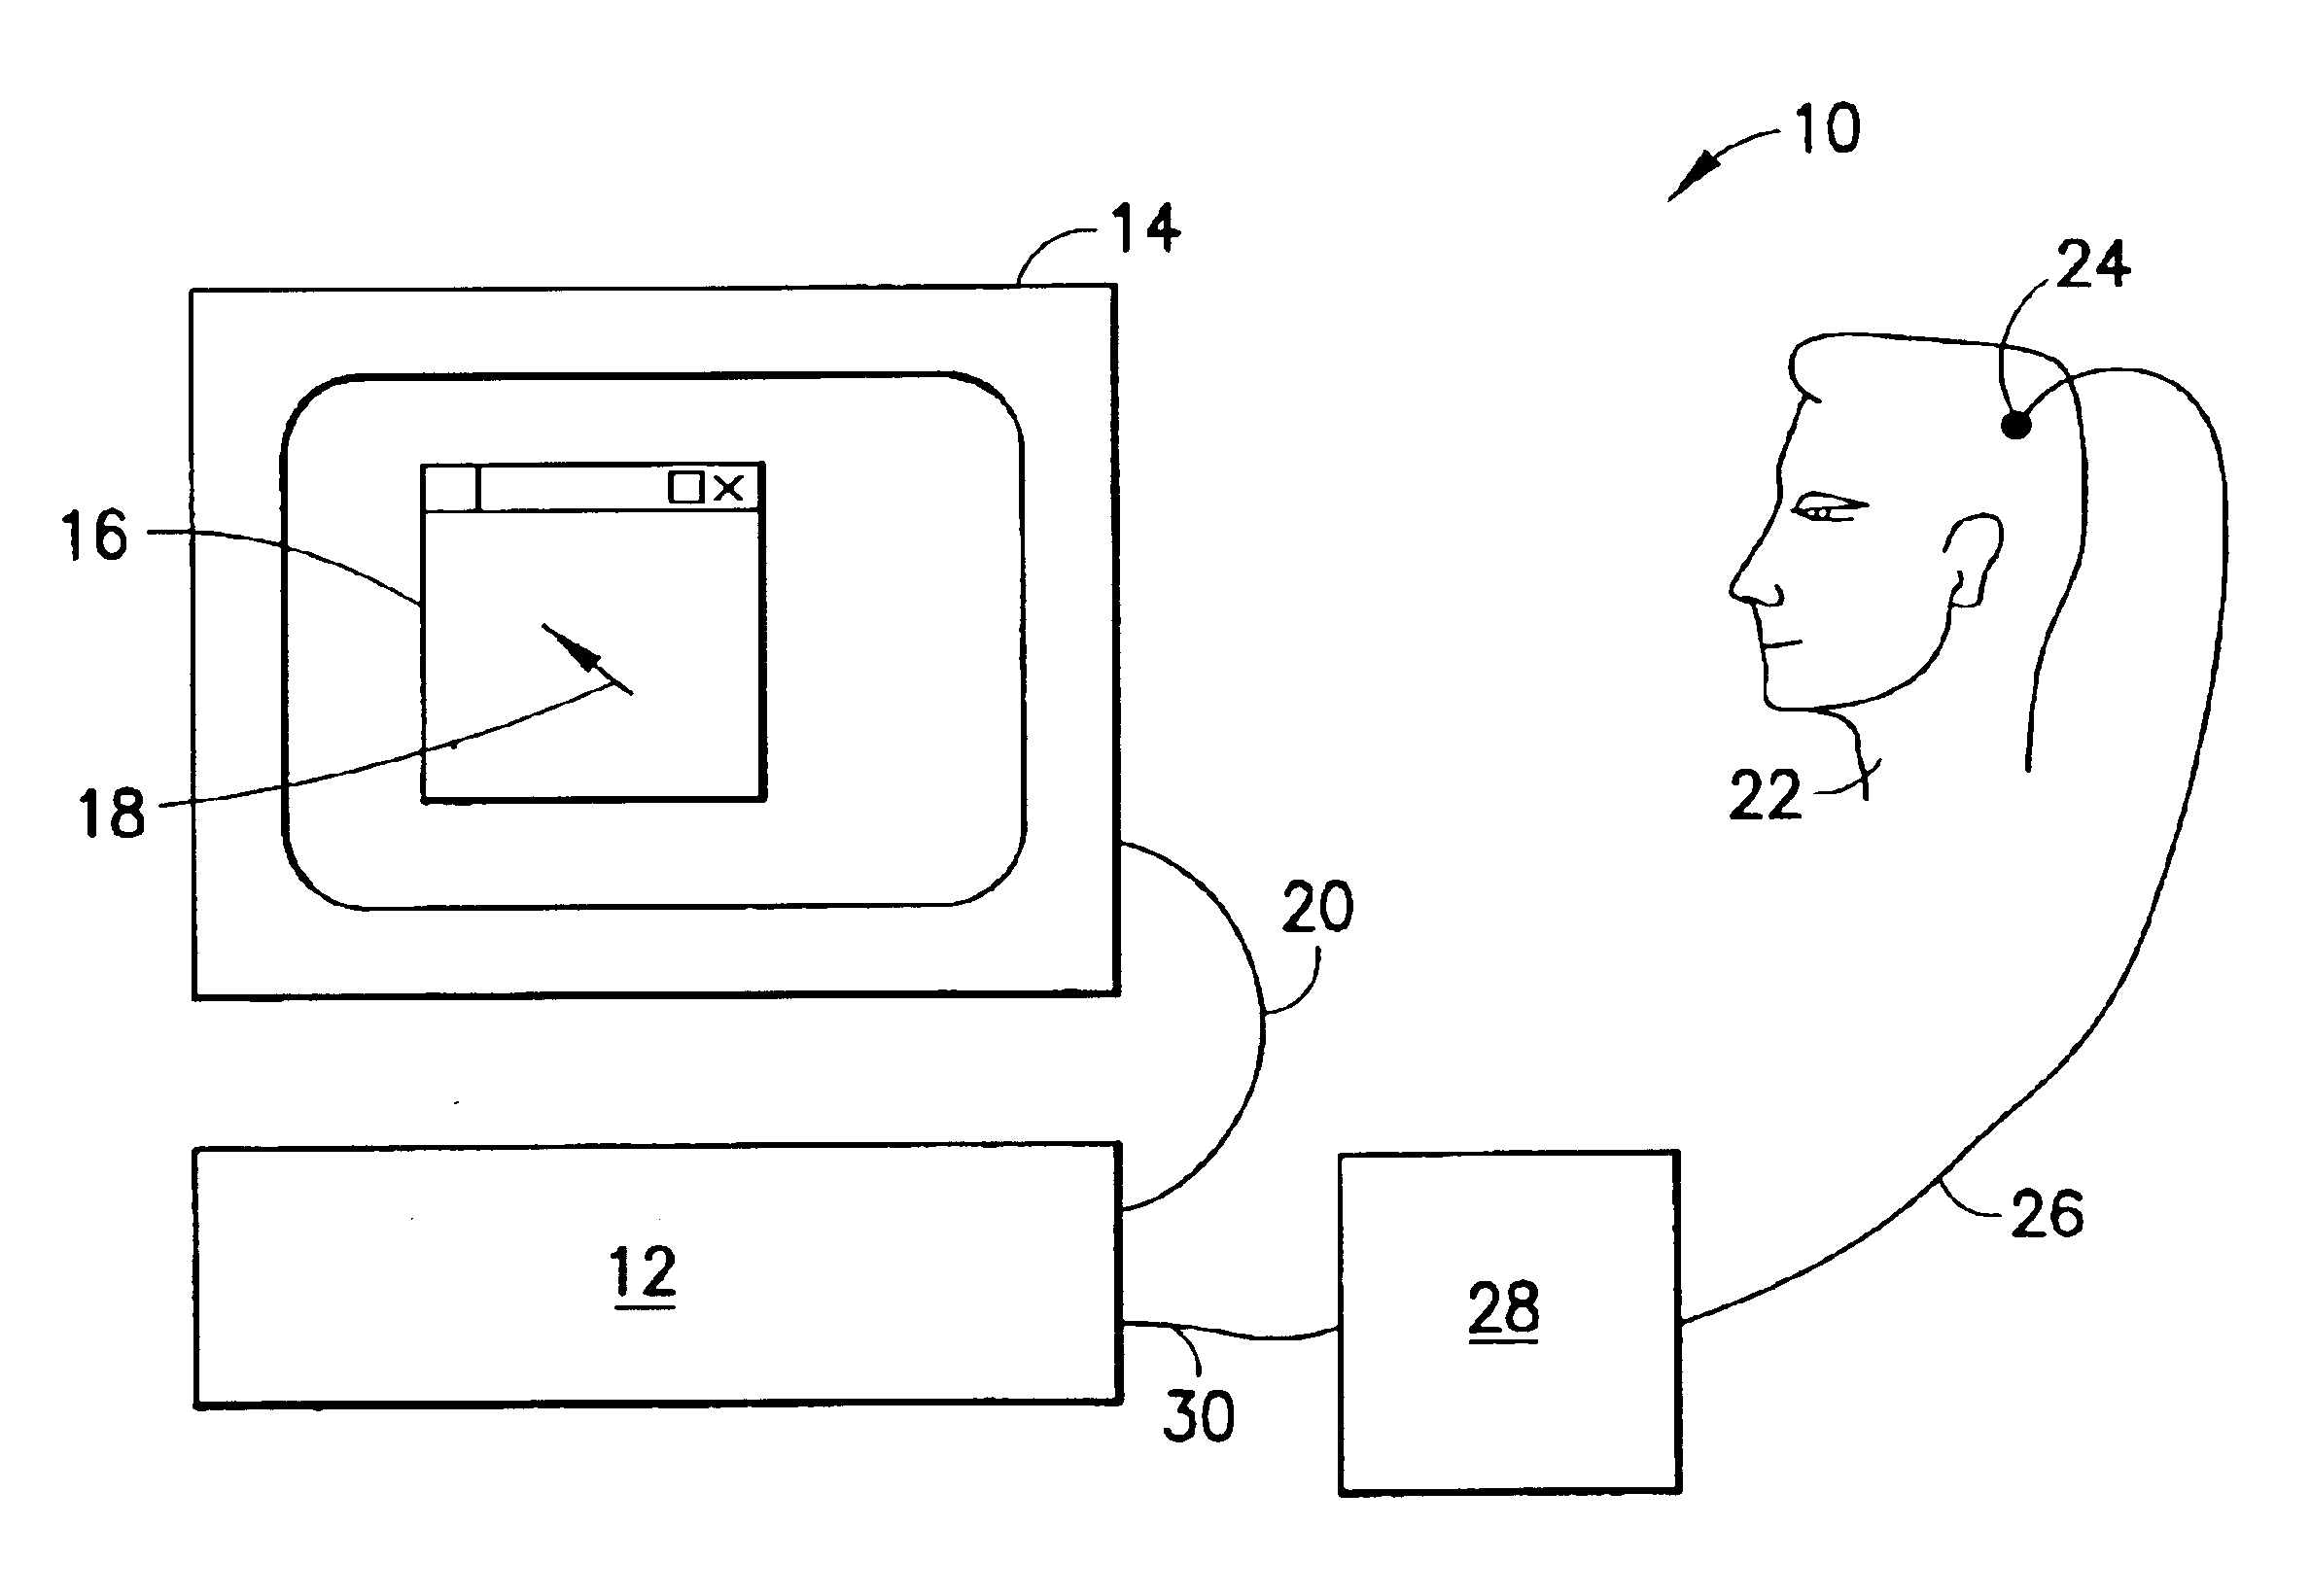 Method and apparatus for navigating a windowed operating environment